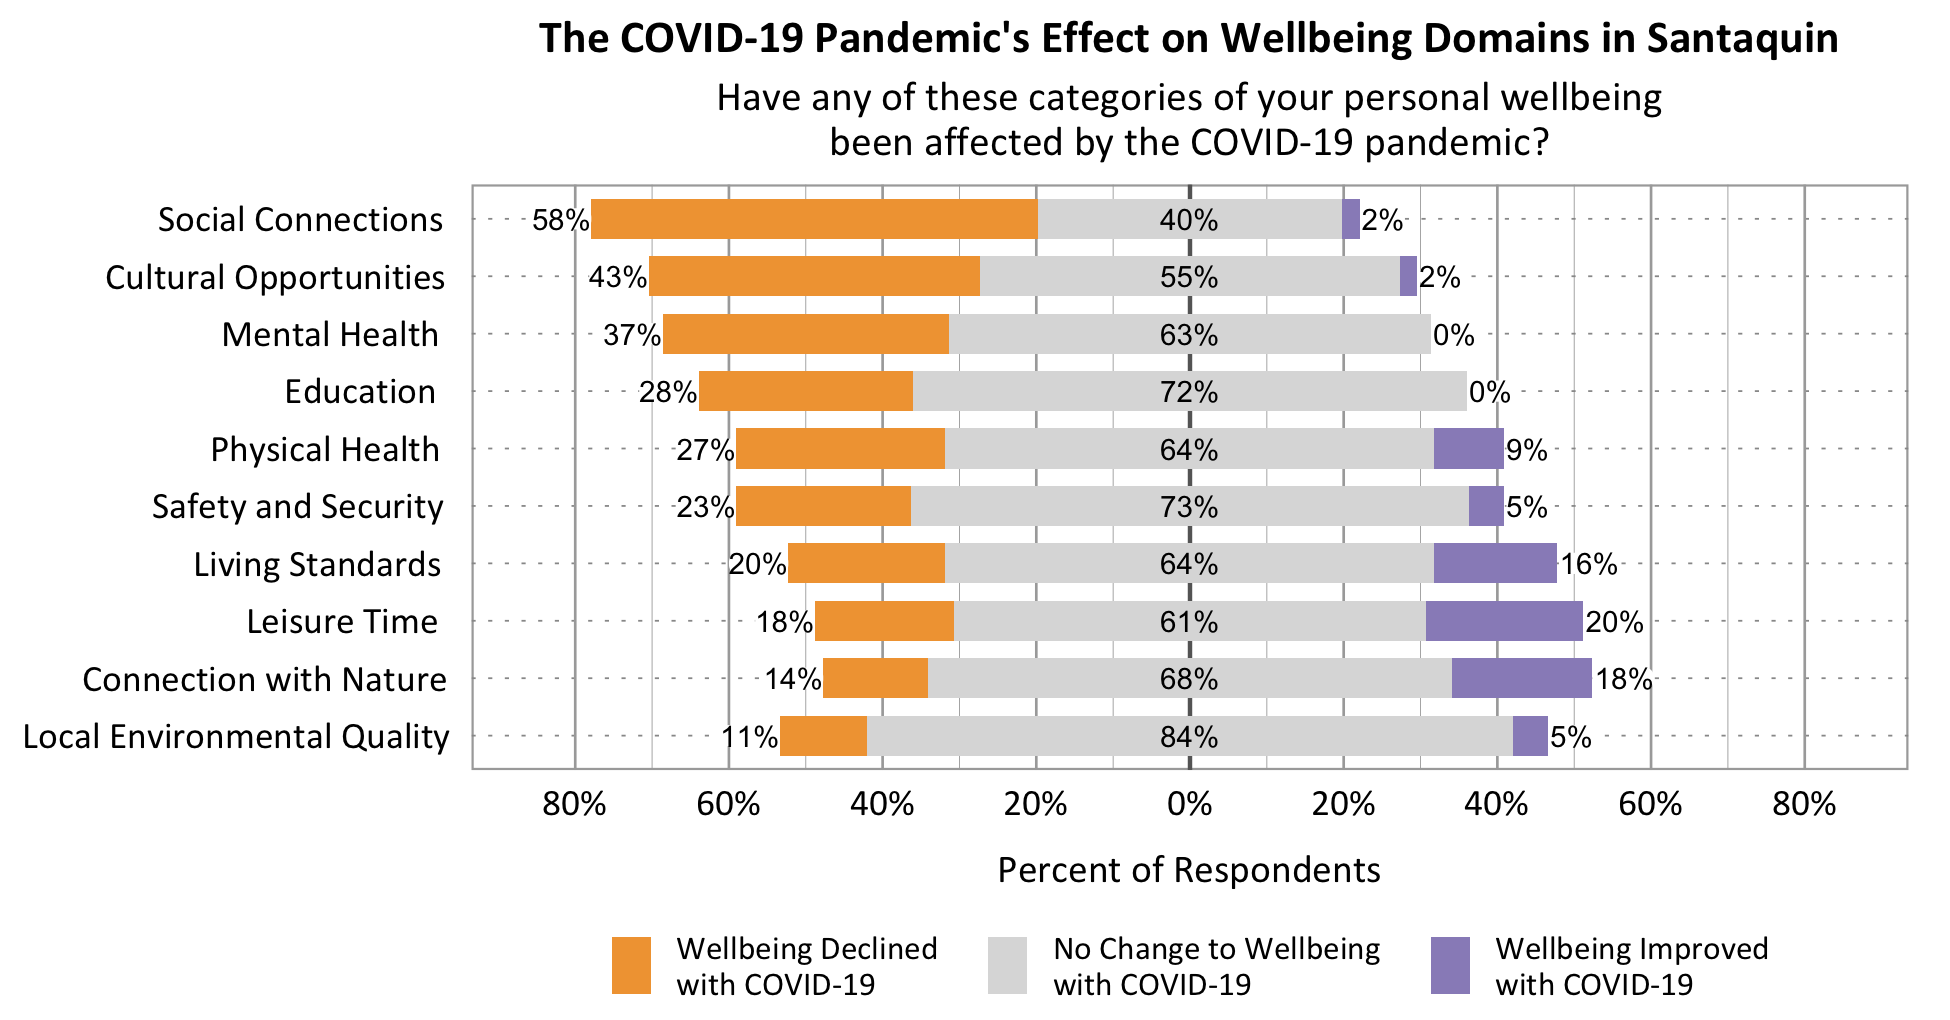 Likert Graph. Title: The COVID-19 Pandemic's effect on wellbeing domains in Sandy. Subtitle: Have any of these categories of your personal wellbeing been affected by the COVID-19 pandemic? Data – Category: Social Connections- 58% of respondents rated wellbeing declined with COVID-19, 40% of respondents rated no change to wellbeing with COVID-19, 2% of respondents rated wellbeing improved with COVID-19; Category: Mental Health- 37% of respondents rated wellbeing declined with COVID-19, 63% of respondents rated no change to wellbeing with COVID-19, 0% of respondents rated wellbeing improved with COVID-19; Category: Cultural Opportunities- 43% of respondents rated wellbeing declined with COVID-19, 55% of respondents rated no change to wellbeing with COVID-19, 2% of respondents rated wellbeing improved with COVID-19; Category: Physical Health- 27% of respondents rated wellbeing declined with COVID-19, 64% of respondents rated no change to wellbeing with COVID-19, 9% of respondents rated wellbeing improved with COVID-19; Category: Leisure Time - 18% of respondents rated wellbeing declined with COVID-19, 61% of respondents rated no change to wellbeing with COVID-19, 20% of respondents rated wellbeing improved with COVID-19; Category: Education- 28% of respondents rated wellbeing declined with COVID-19, 72% of respondents rated no change to wellbeing with COVID-19, 0% of respondents rated wellbeing improved with COVID-19; Category: Living Standards- 20% of respondents rated wellbeing declined with COVID-19, 64% of respondents rated no change to wellbeing with COVID-19, 16% of respondents rated wellbeing improved with COVID-19; Category: Connection with Nature- 14% of respondents rated wellbeing declined with COVID-19, 68% of respondents rated no change to wellbeing with COVID-19, 18% of respondents rated wellbeing improved with COVID-19; Category: Local Environmental Quality- 11% of respondents rated wellbeing declined with COVID-19, 84% of respondents rated no change to wellbeing with COVID-19, 5% of respondents rated wellbeing improved with COVID-19; Category:  Safety and Security- 23% of respondents rated wellbeing declined with COVID-19, 73% of respondents rated no change to wellbeing with COVID-19, 5% of respondents rated wellbeing improved with COVID-19.